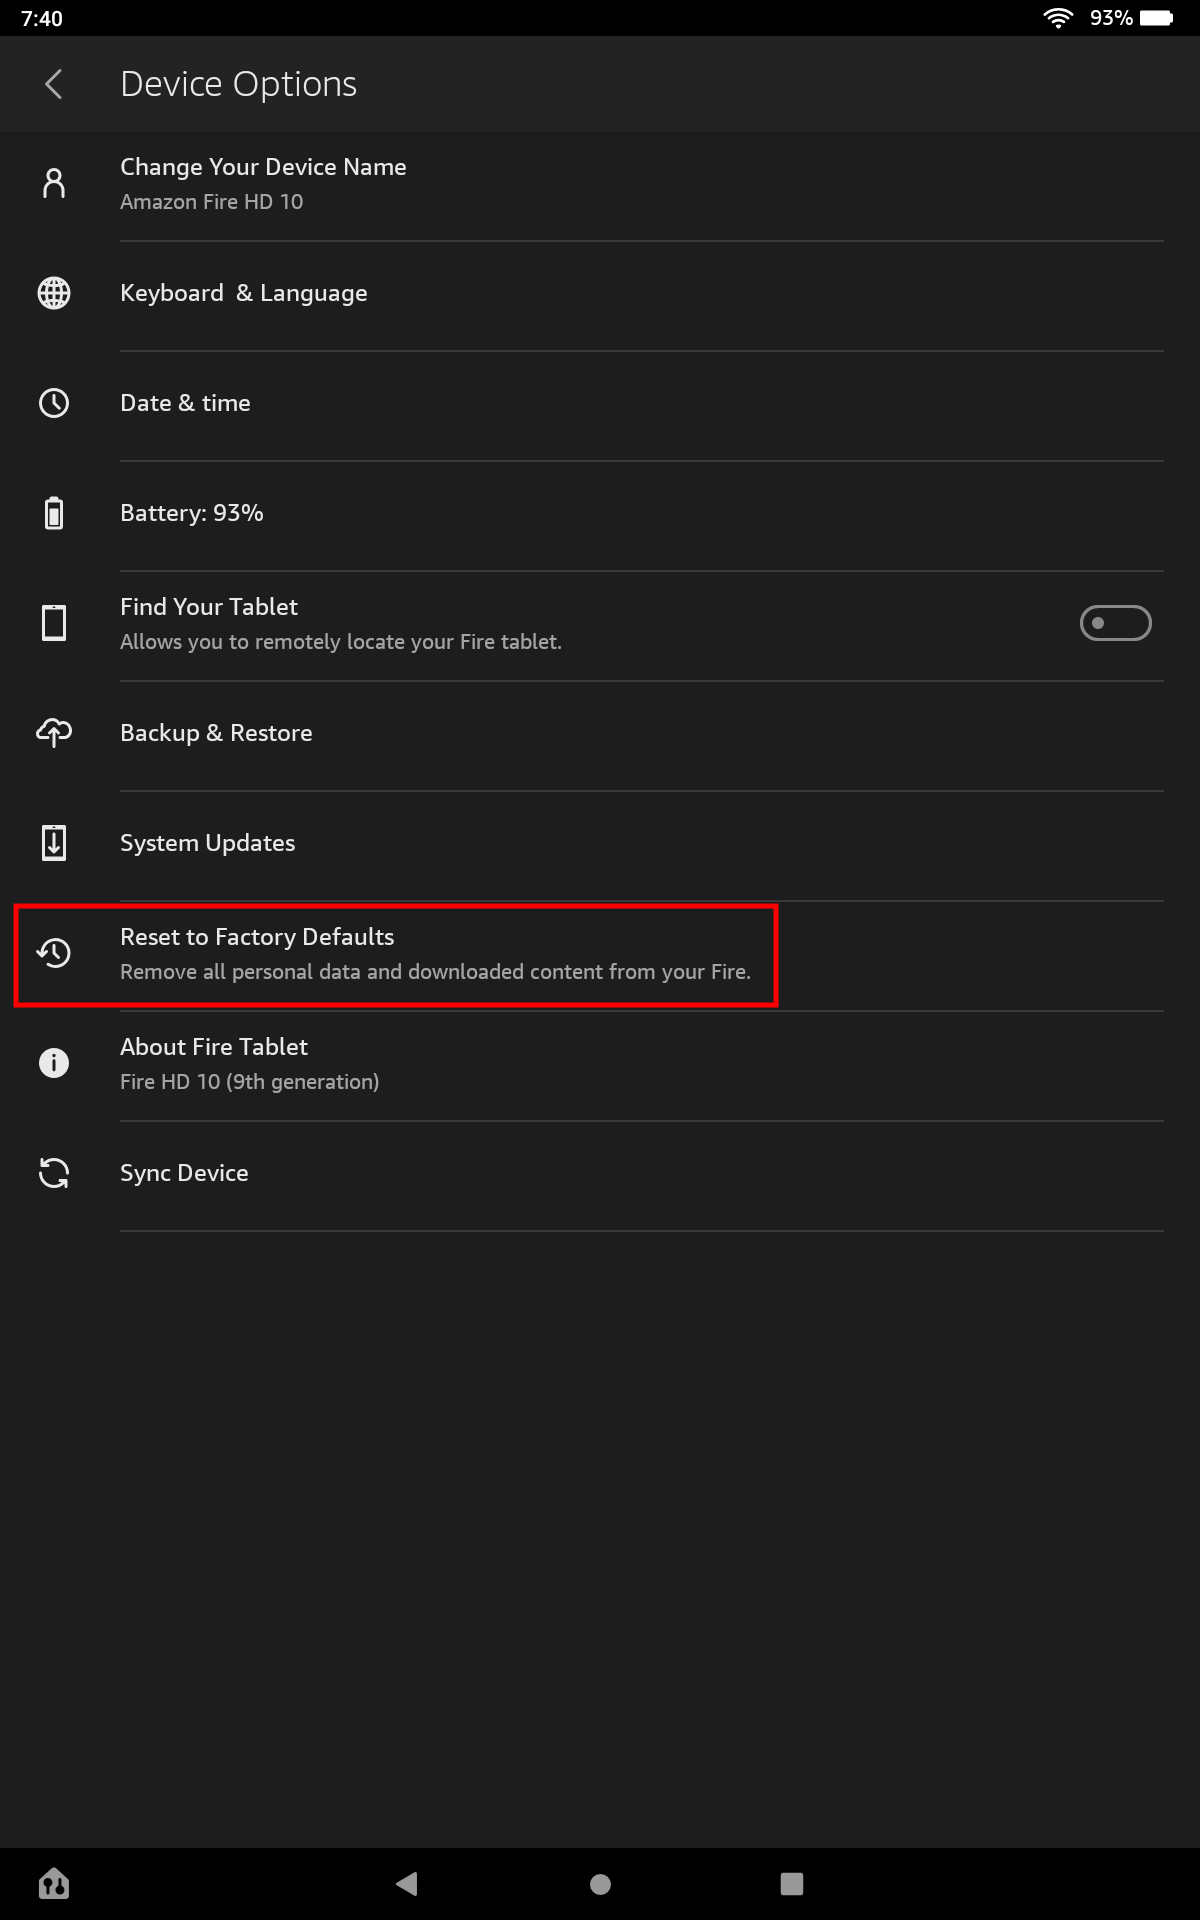 How to factory reset your Amazon Fire tablet from the settings 2